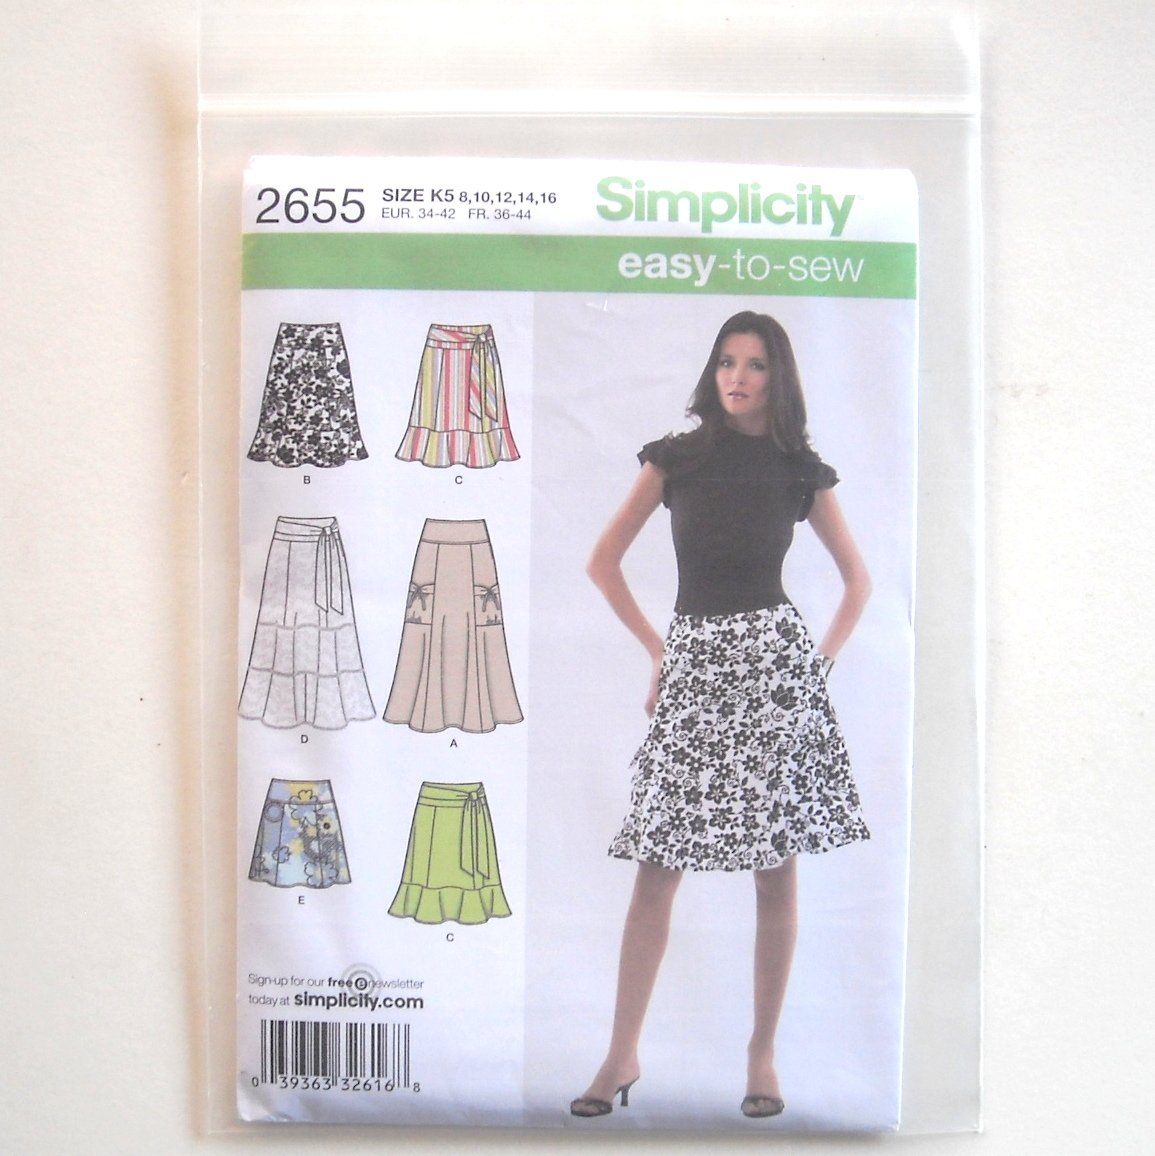 Misses Petite Skirt Easy To Sew Size K5 8 - 16 Simplicity Sewing ...